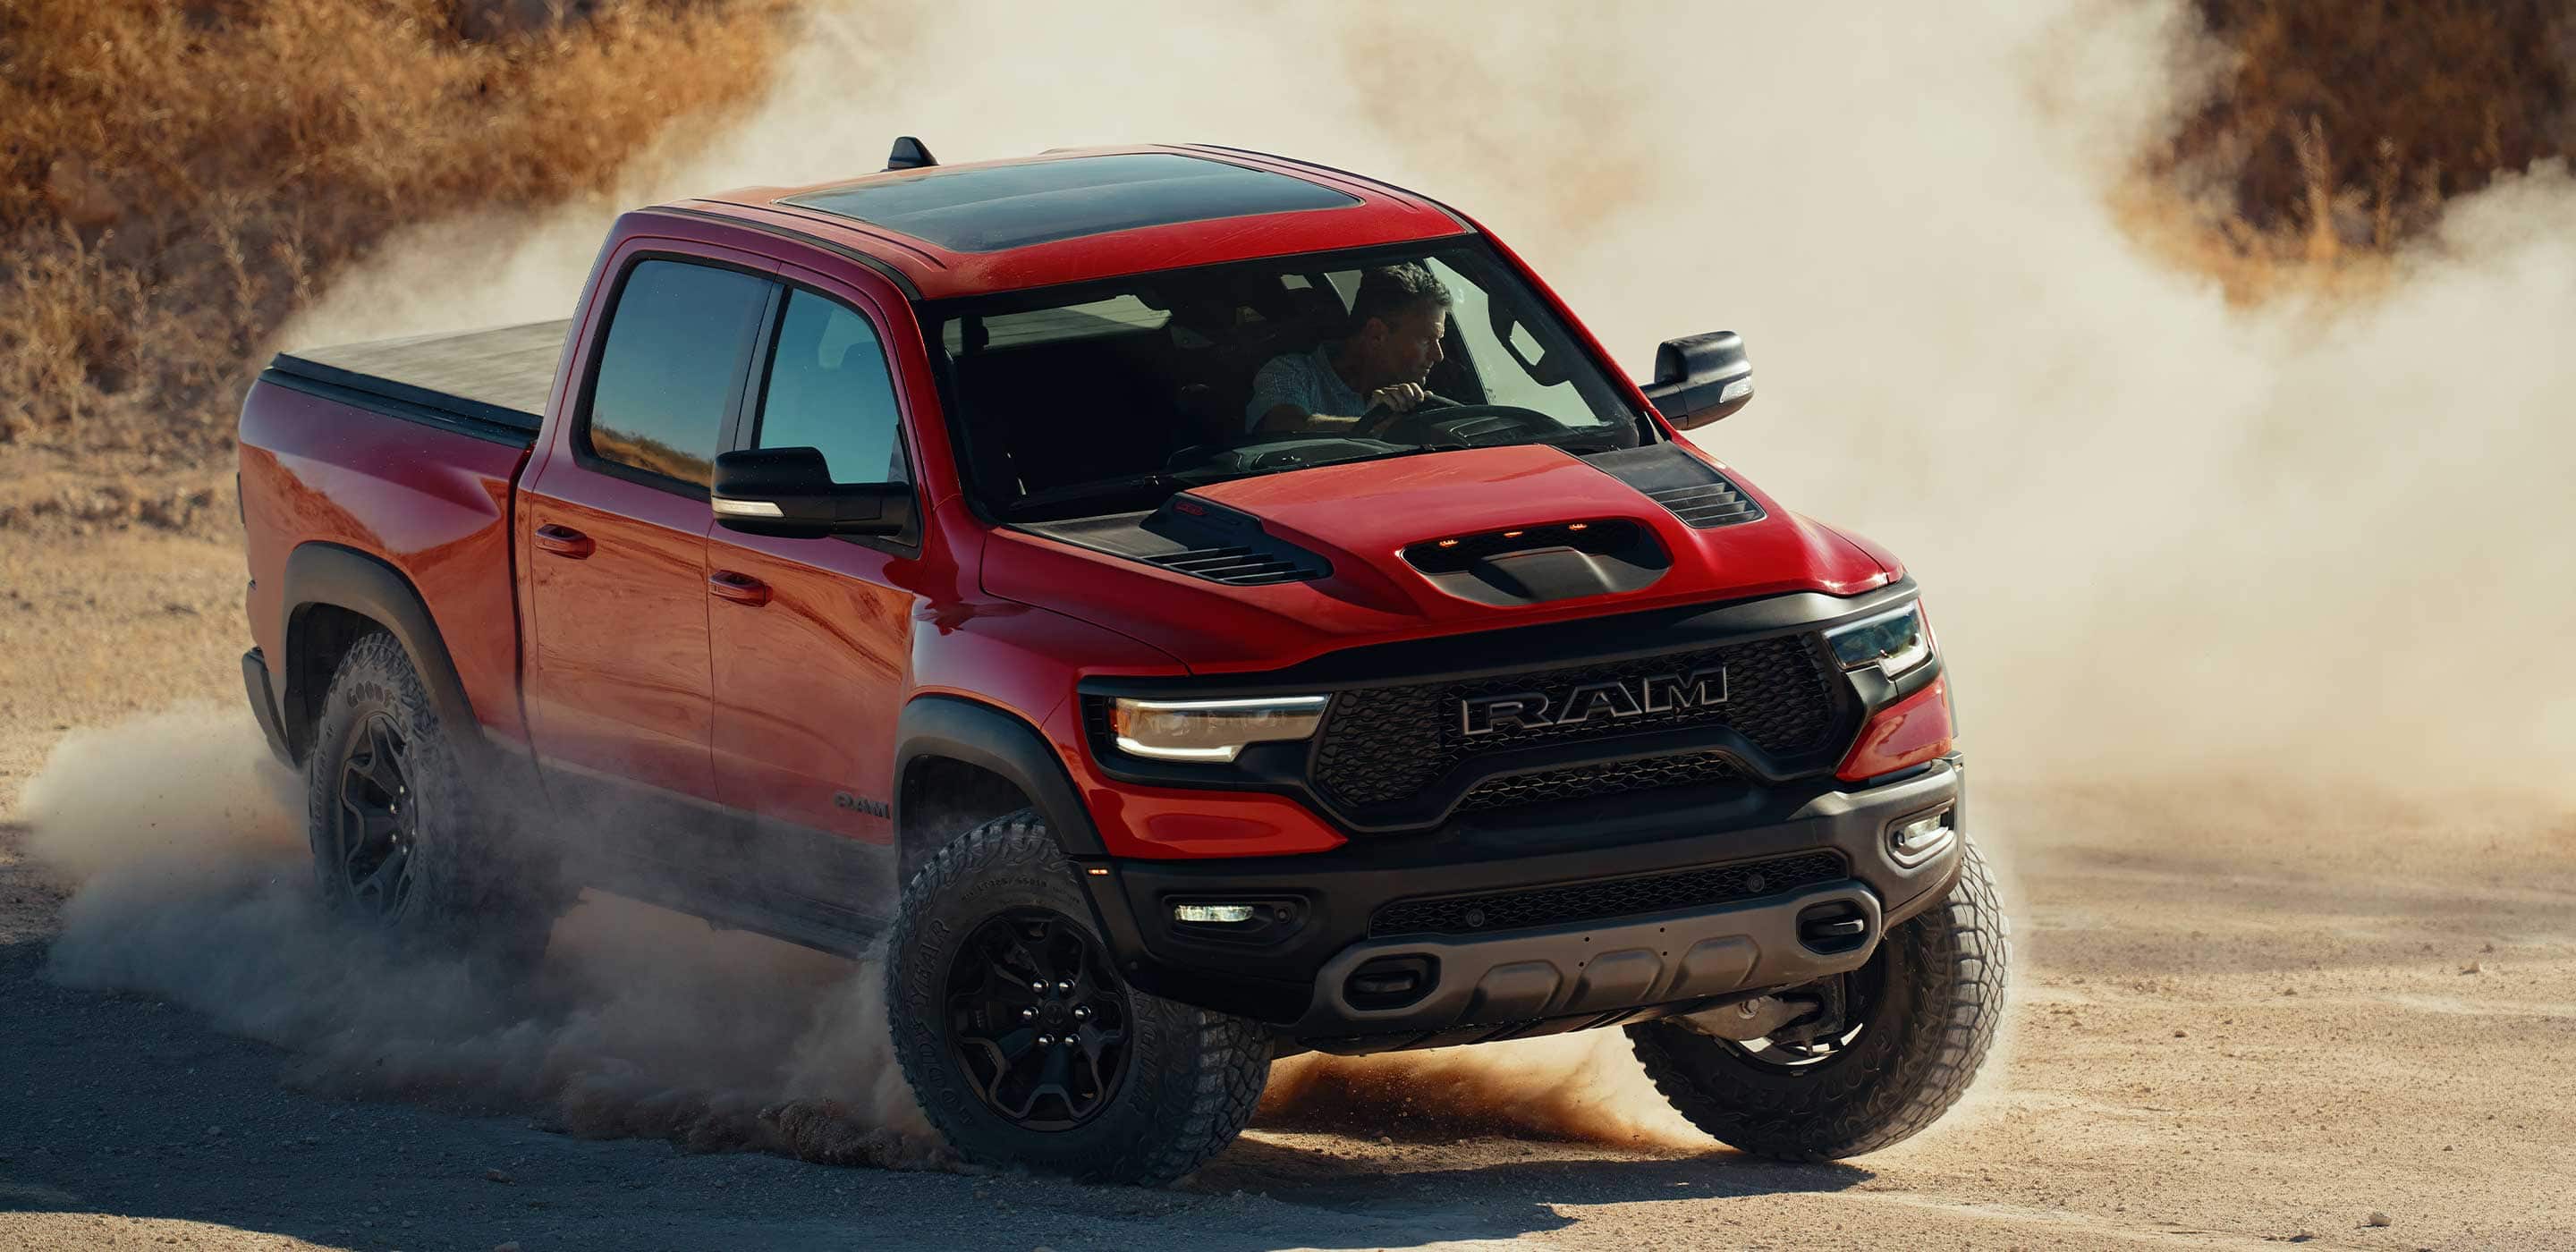 Display The 2022 Ram TRX being driven off-road on sand with the available tonneau cover.